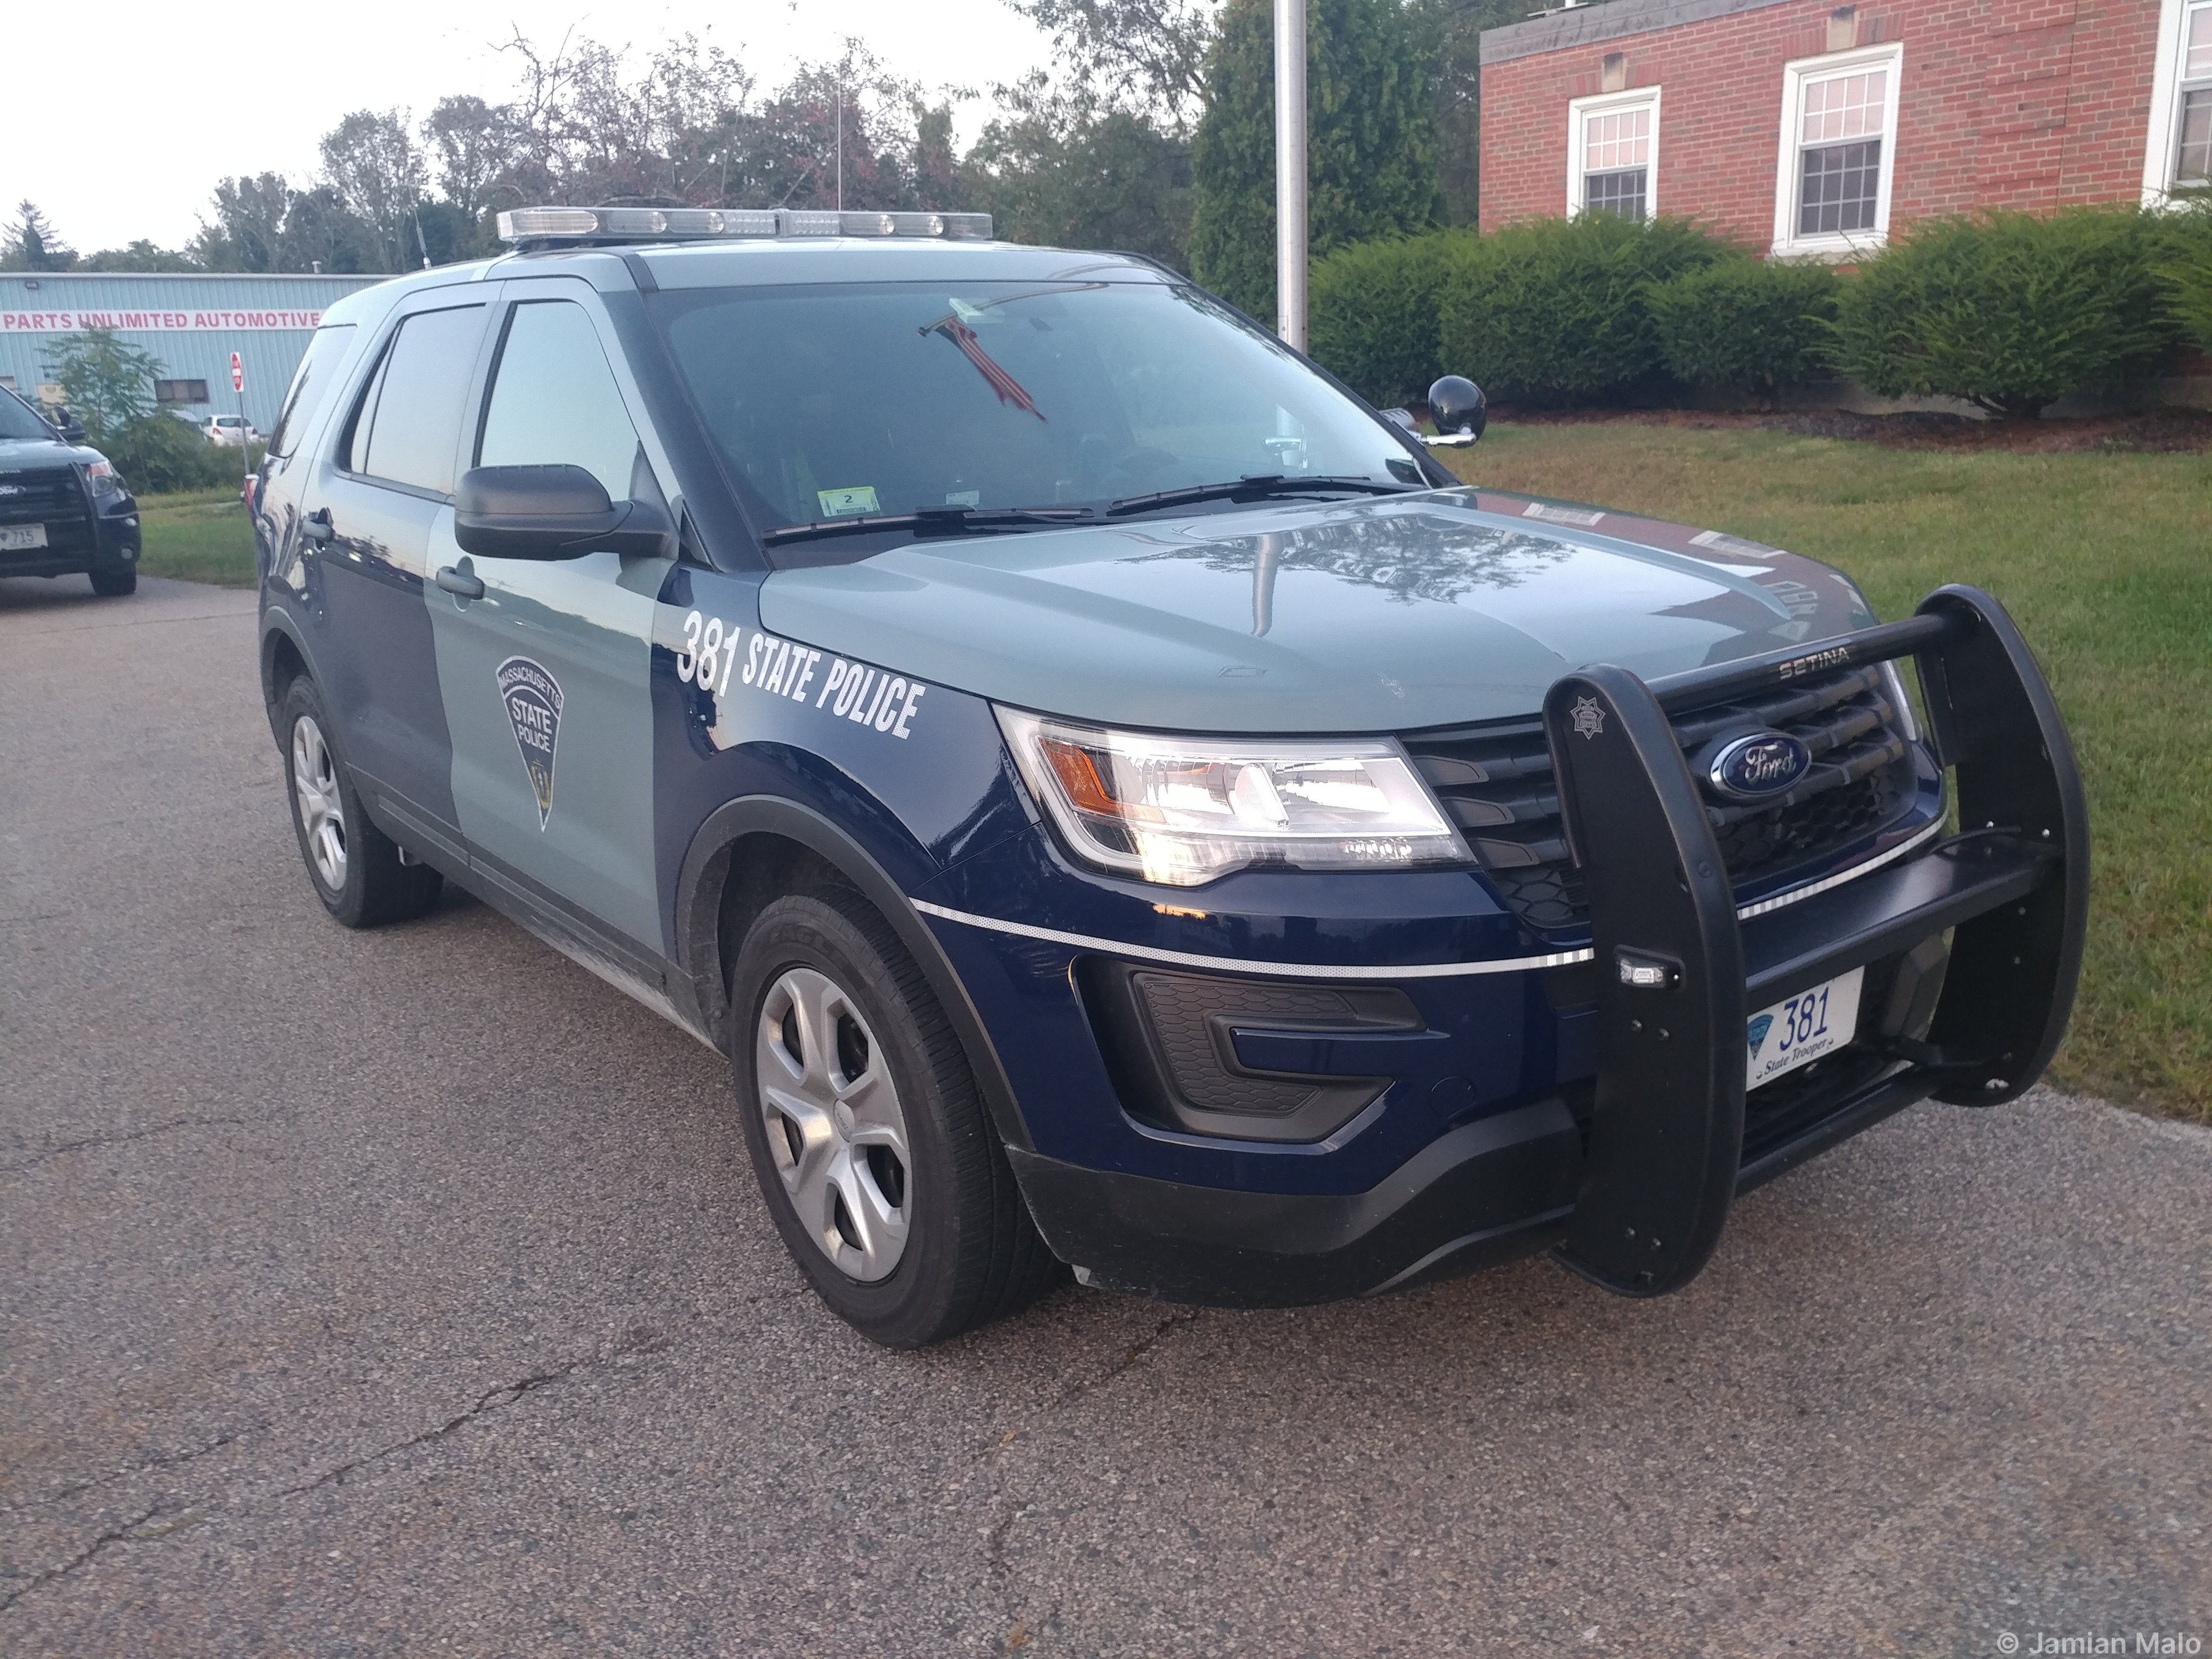 A photo  of Massachusetts State Police
            Cruiser 381, a 2016-2019 Ford Police Interceptor Utility             taken by Jamian Malo